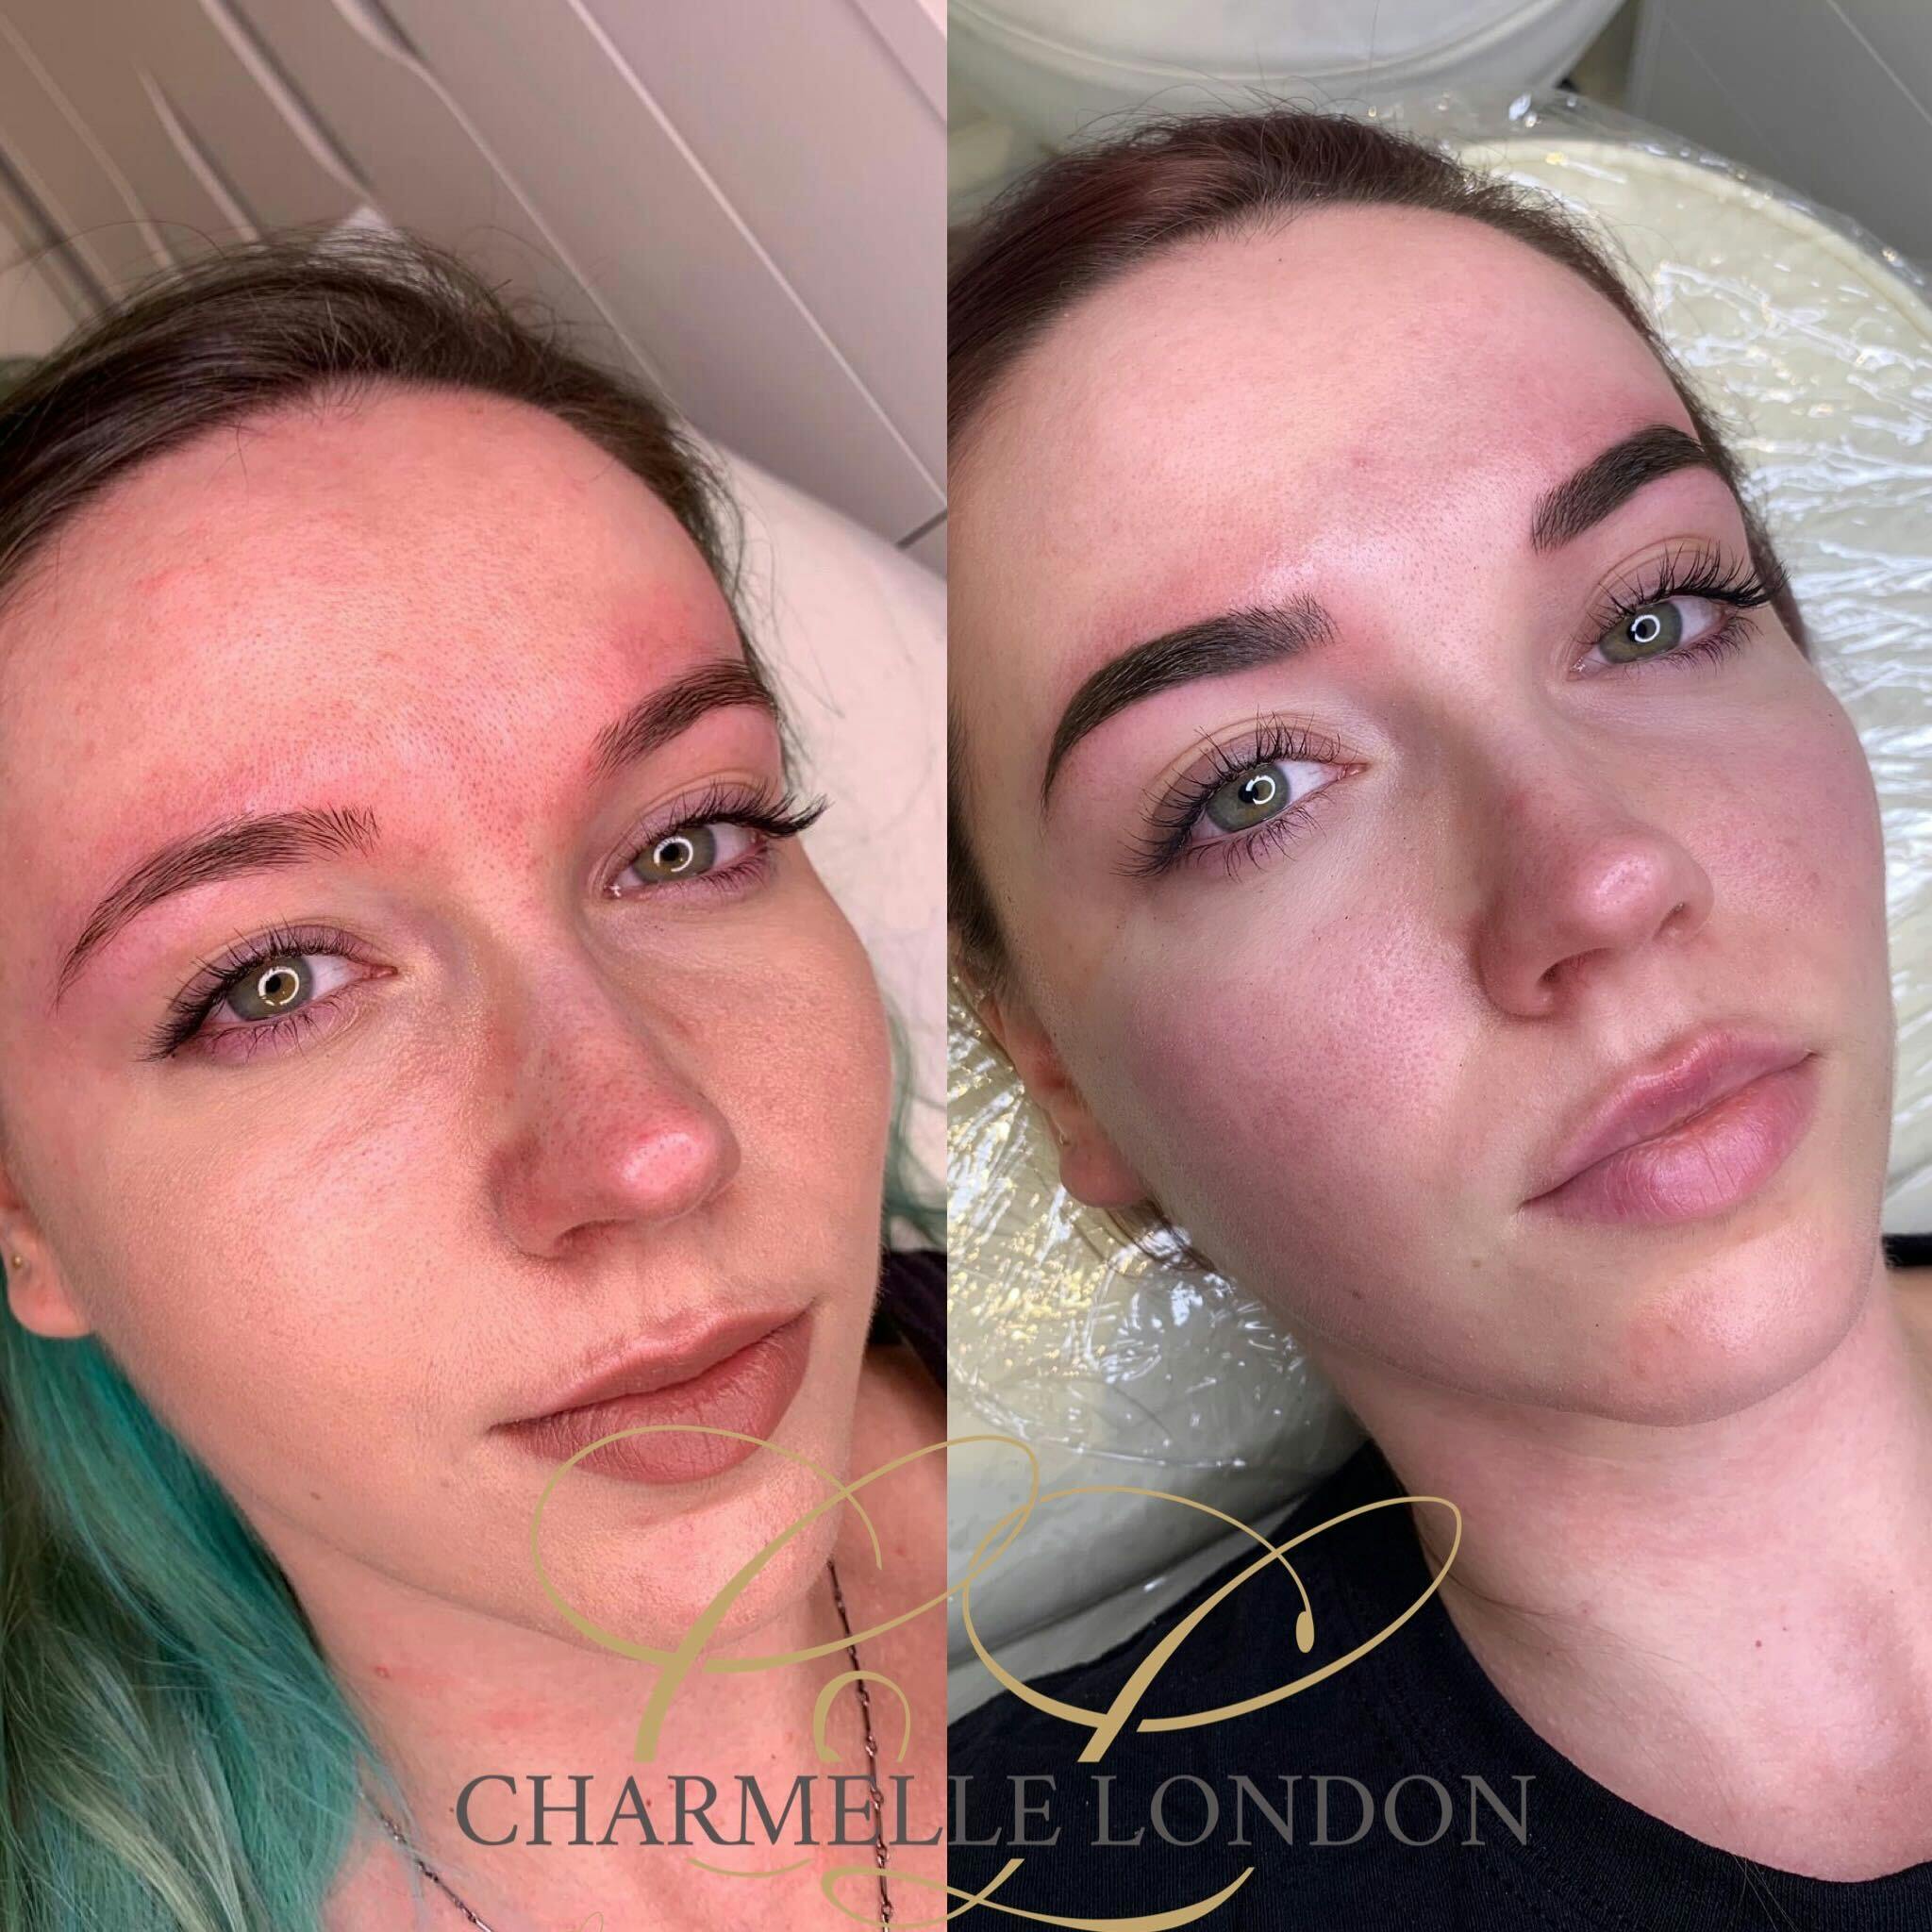 The team at Charmelle London has many years of experience and have delivered new looks for hundreds of clients.

We deliver permanent makeup services across brows, eyes and lips unique to your features.

Whether you are looking for something soft and natural or to create more of a statement look, we use the best products and techniques available to create truly bespoke and utterly flawless results for our clients